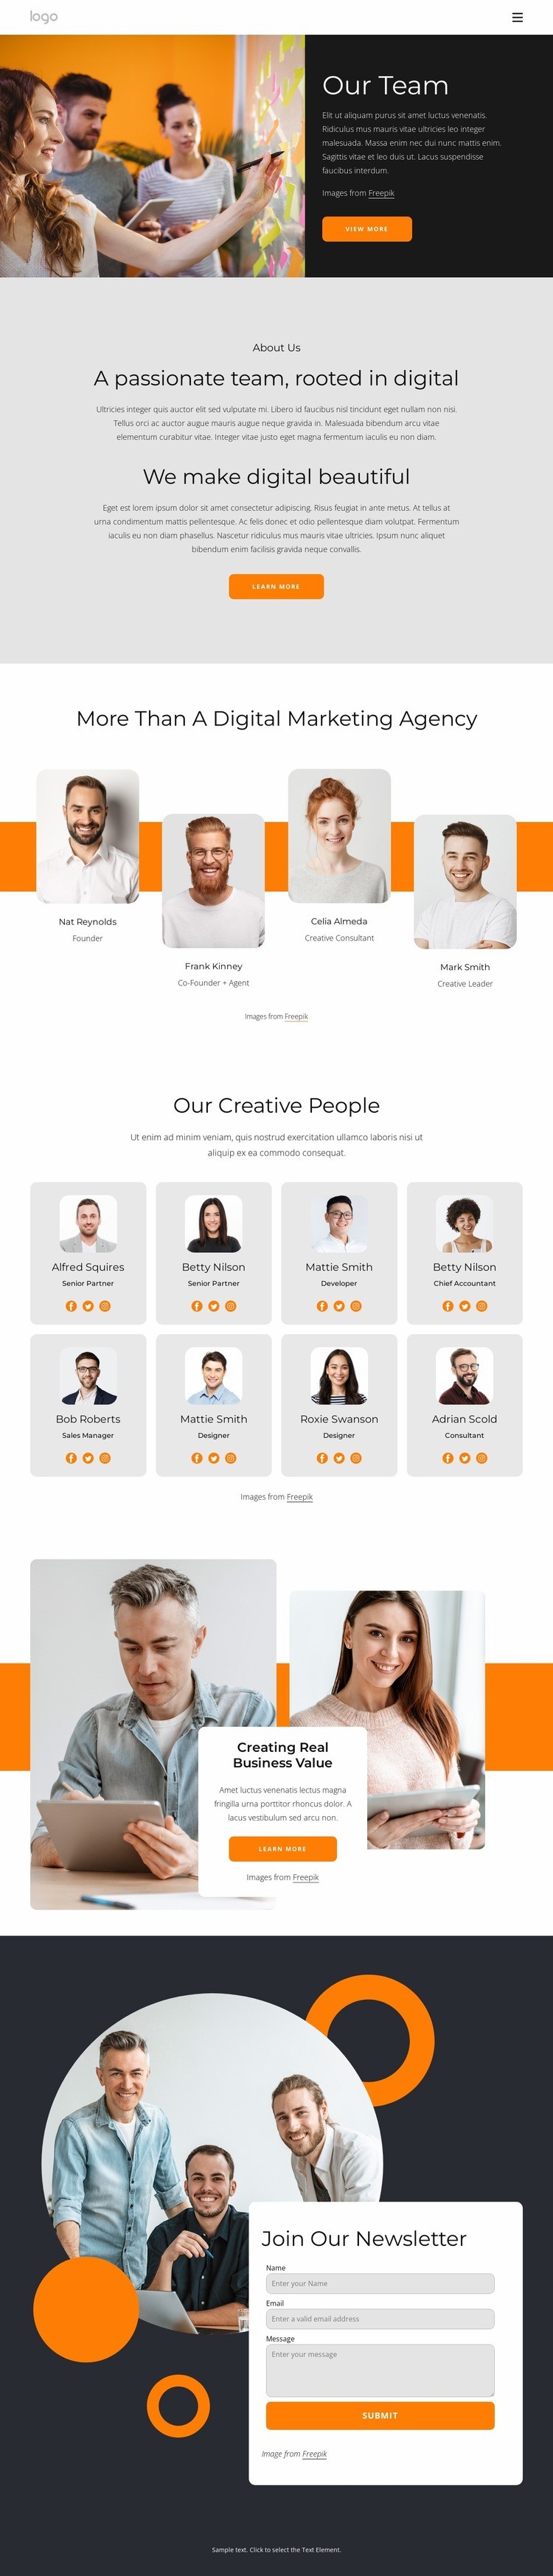 We are creative people with big dreams Web Page Design